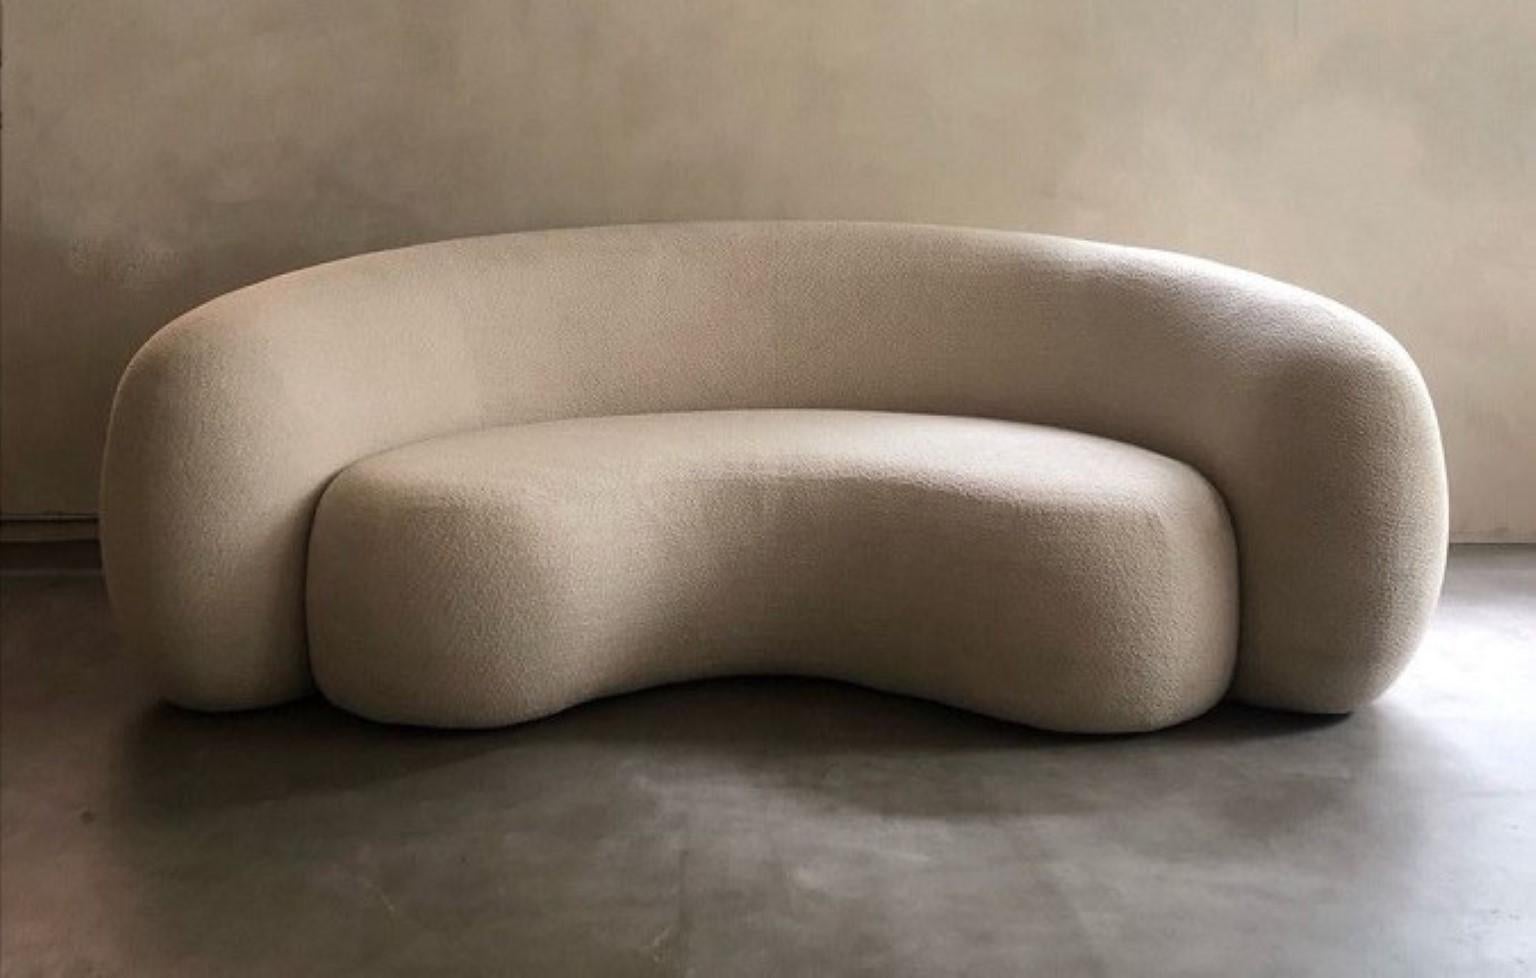 Circular sofa by Karstudio
Dimensions: W 240 x D 133 x H 80 cm
Materials: Fabric, MDF frame


Kar, is the root of Sanskrit Karma, meaning karmic repetition. We seek the cause and effect in aesthetics, inspired from the past, the present, and